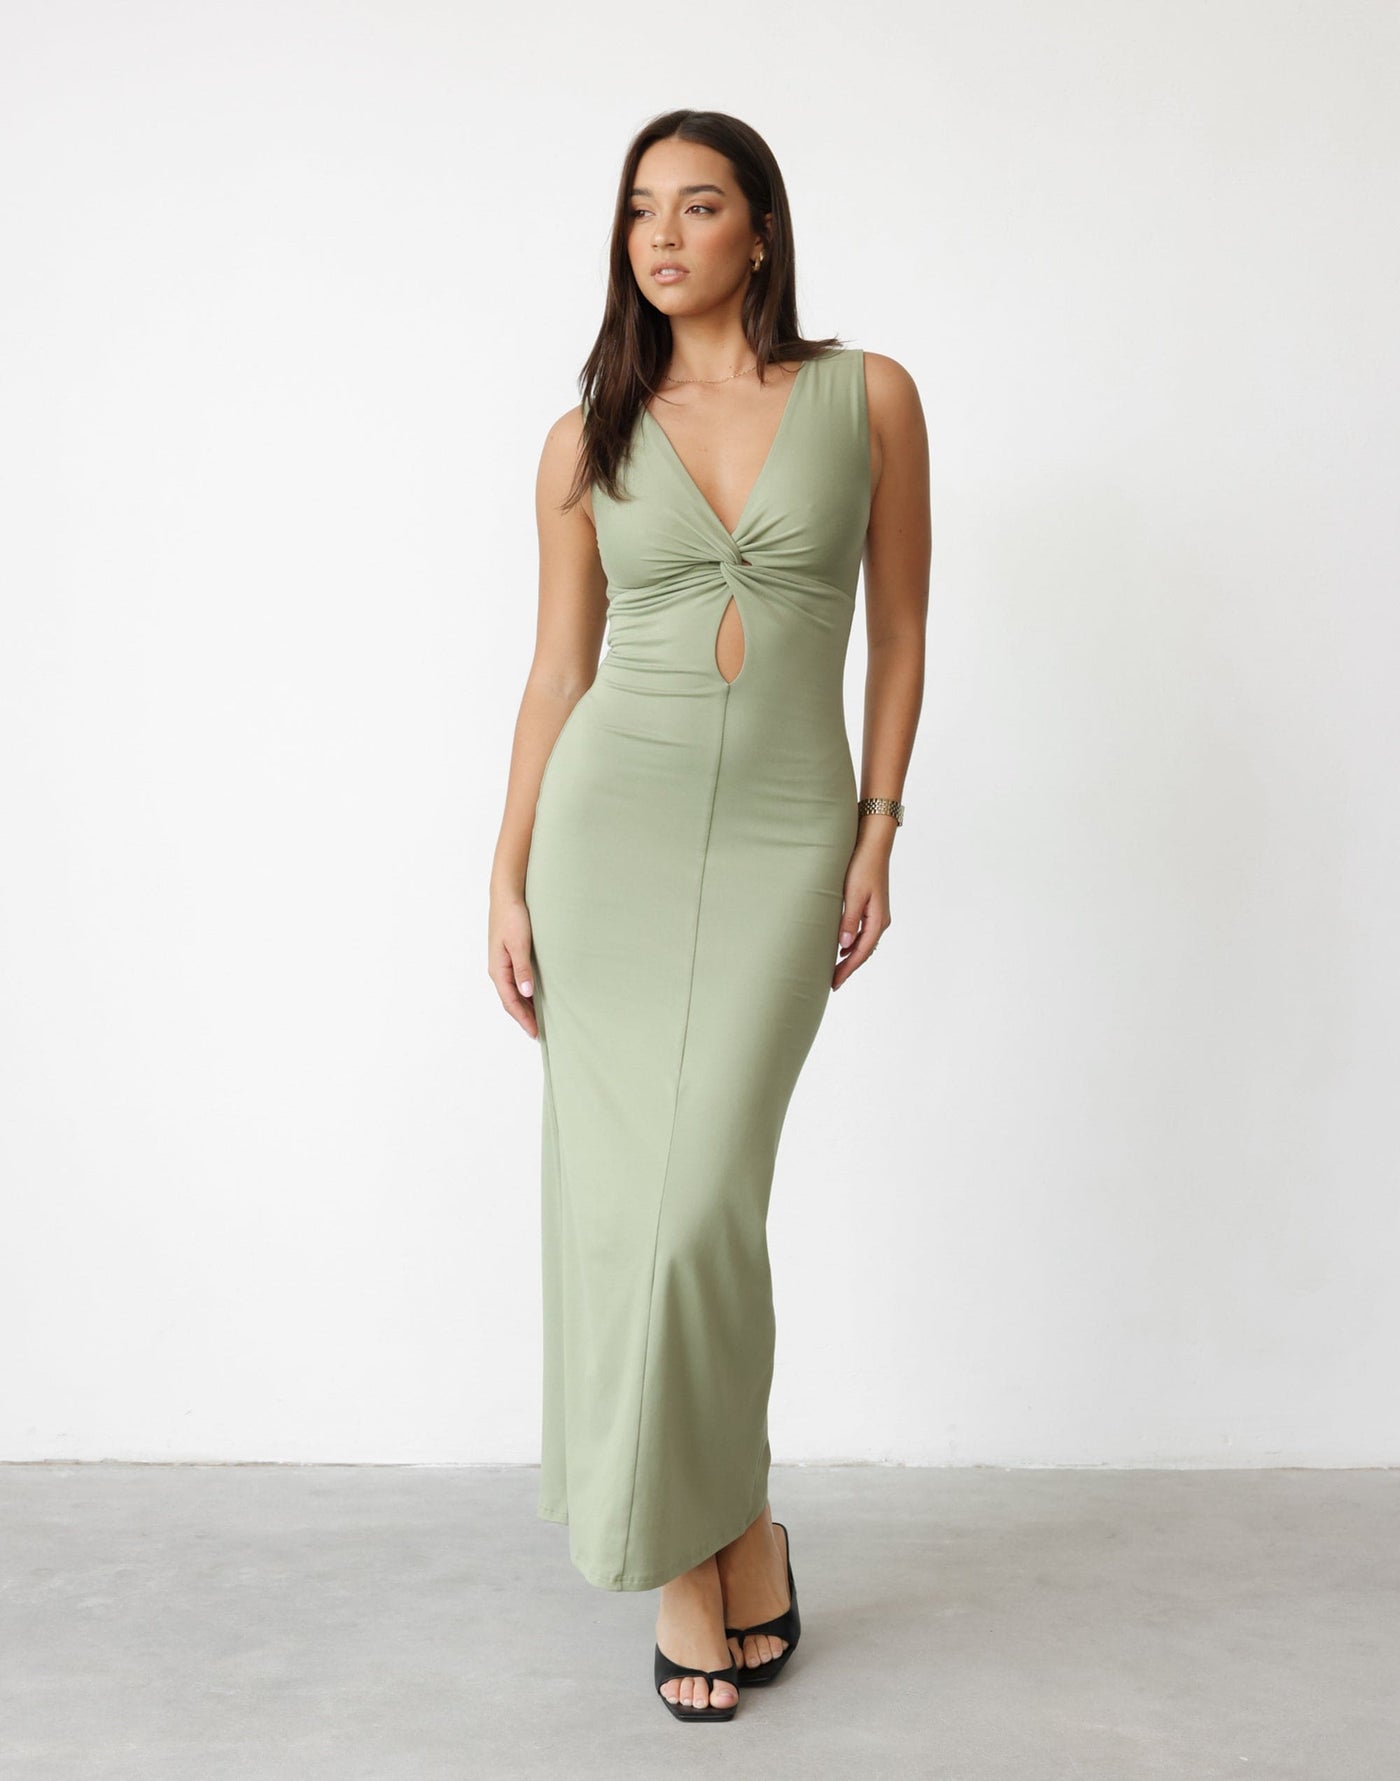 Althea Maxi Dress (Pistachio) | CHARCOAL Exclusive - V-Neck Stretchy Jersey Bodycon Maxi Dress - Women's Dress - Charcoal Clothing